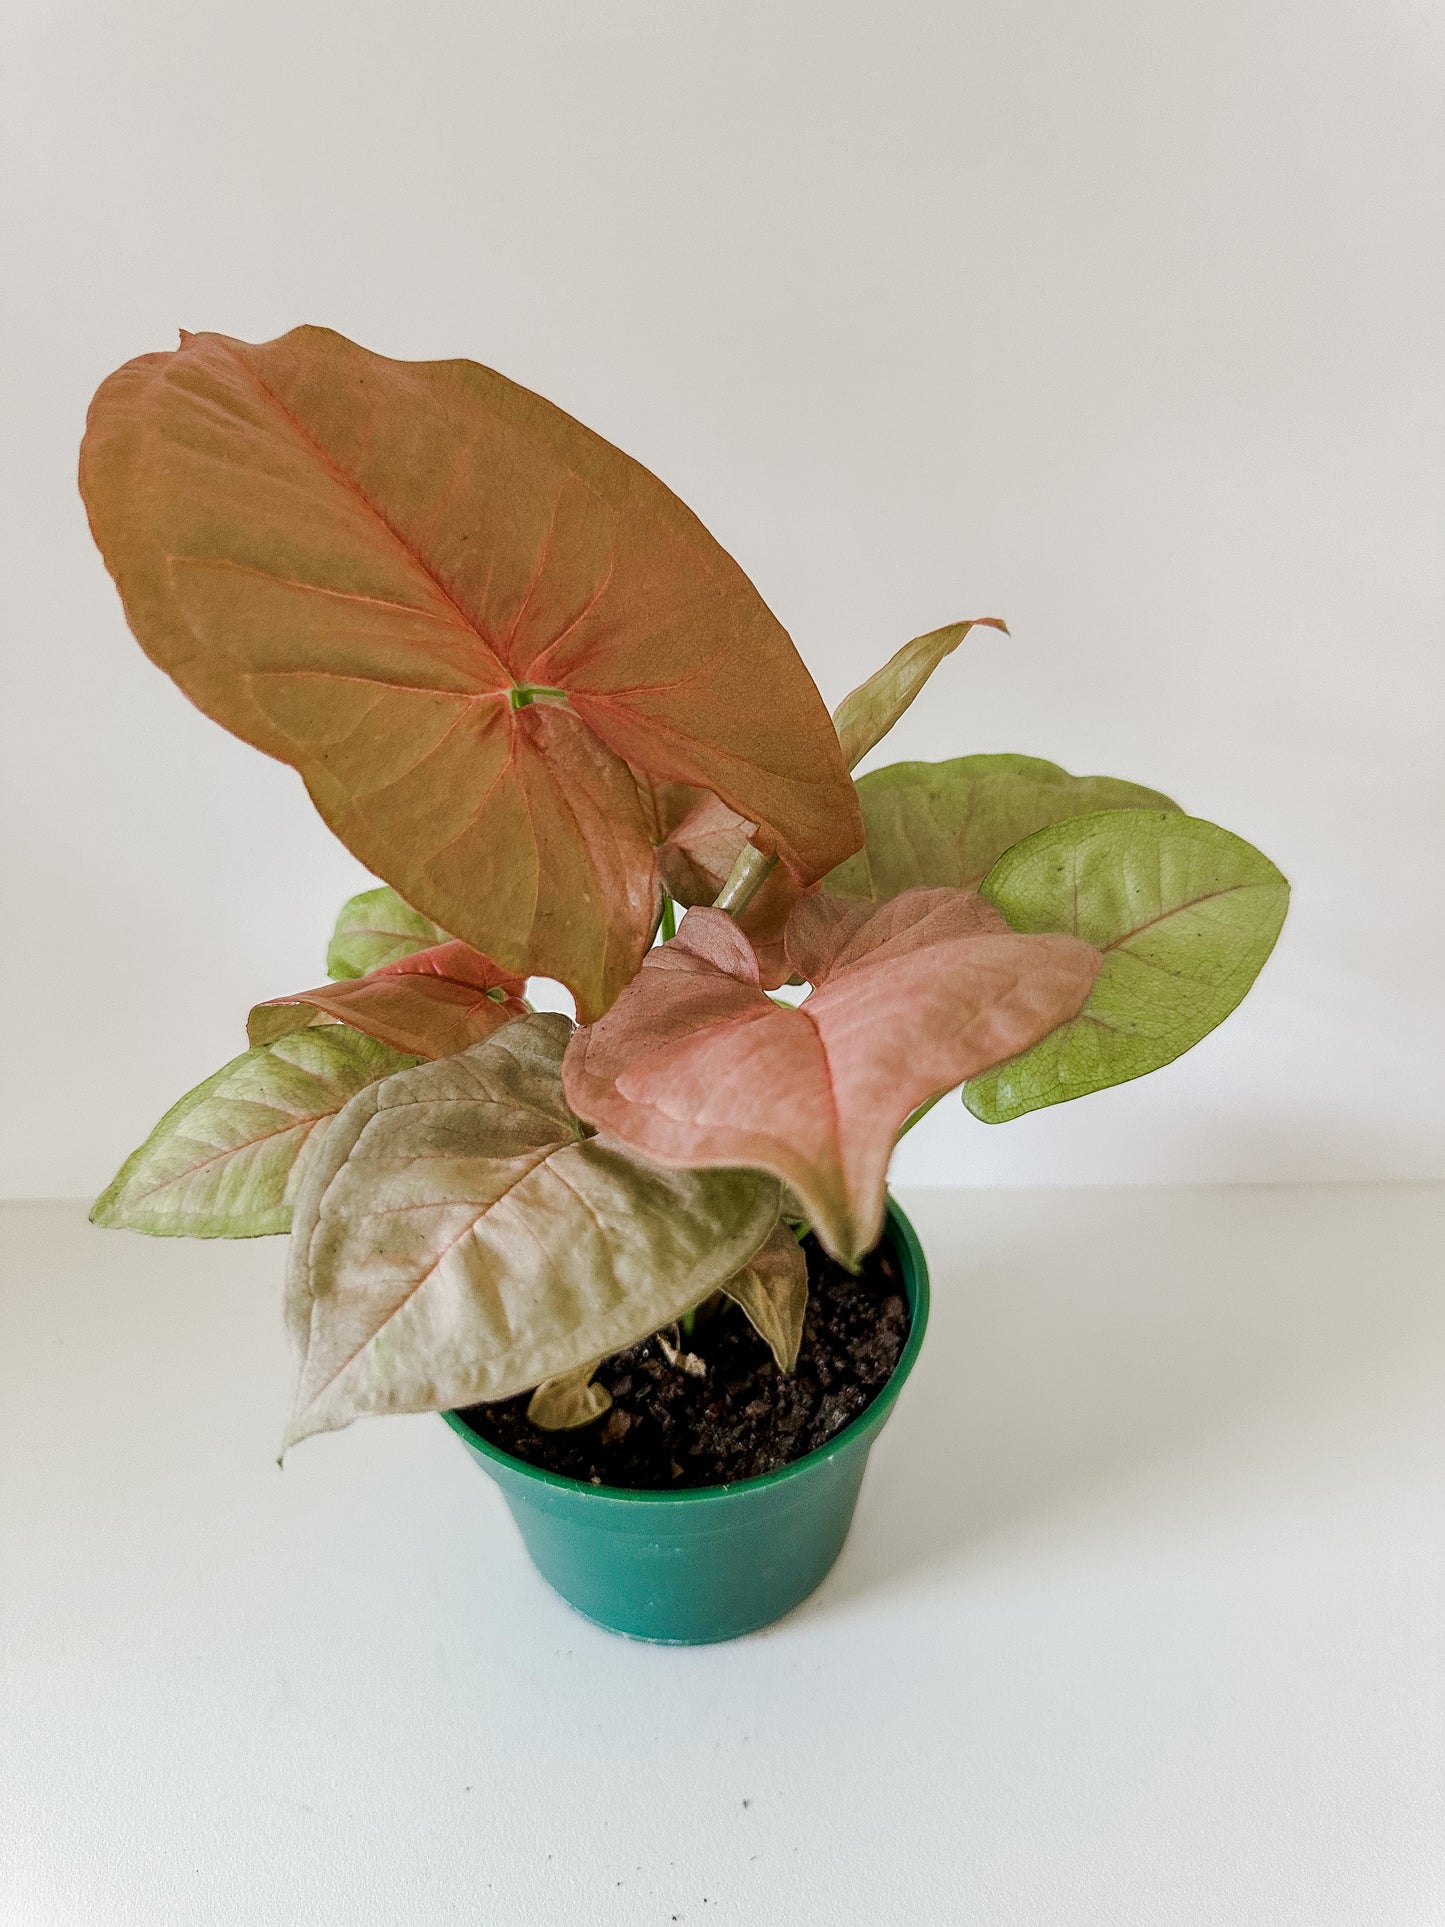 Syngonium Podophyllum 'Strawberry' -  Pink Colored Leaves, Low Maintenance - Tropical Houseplant